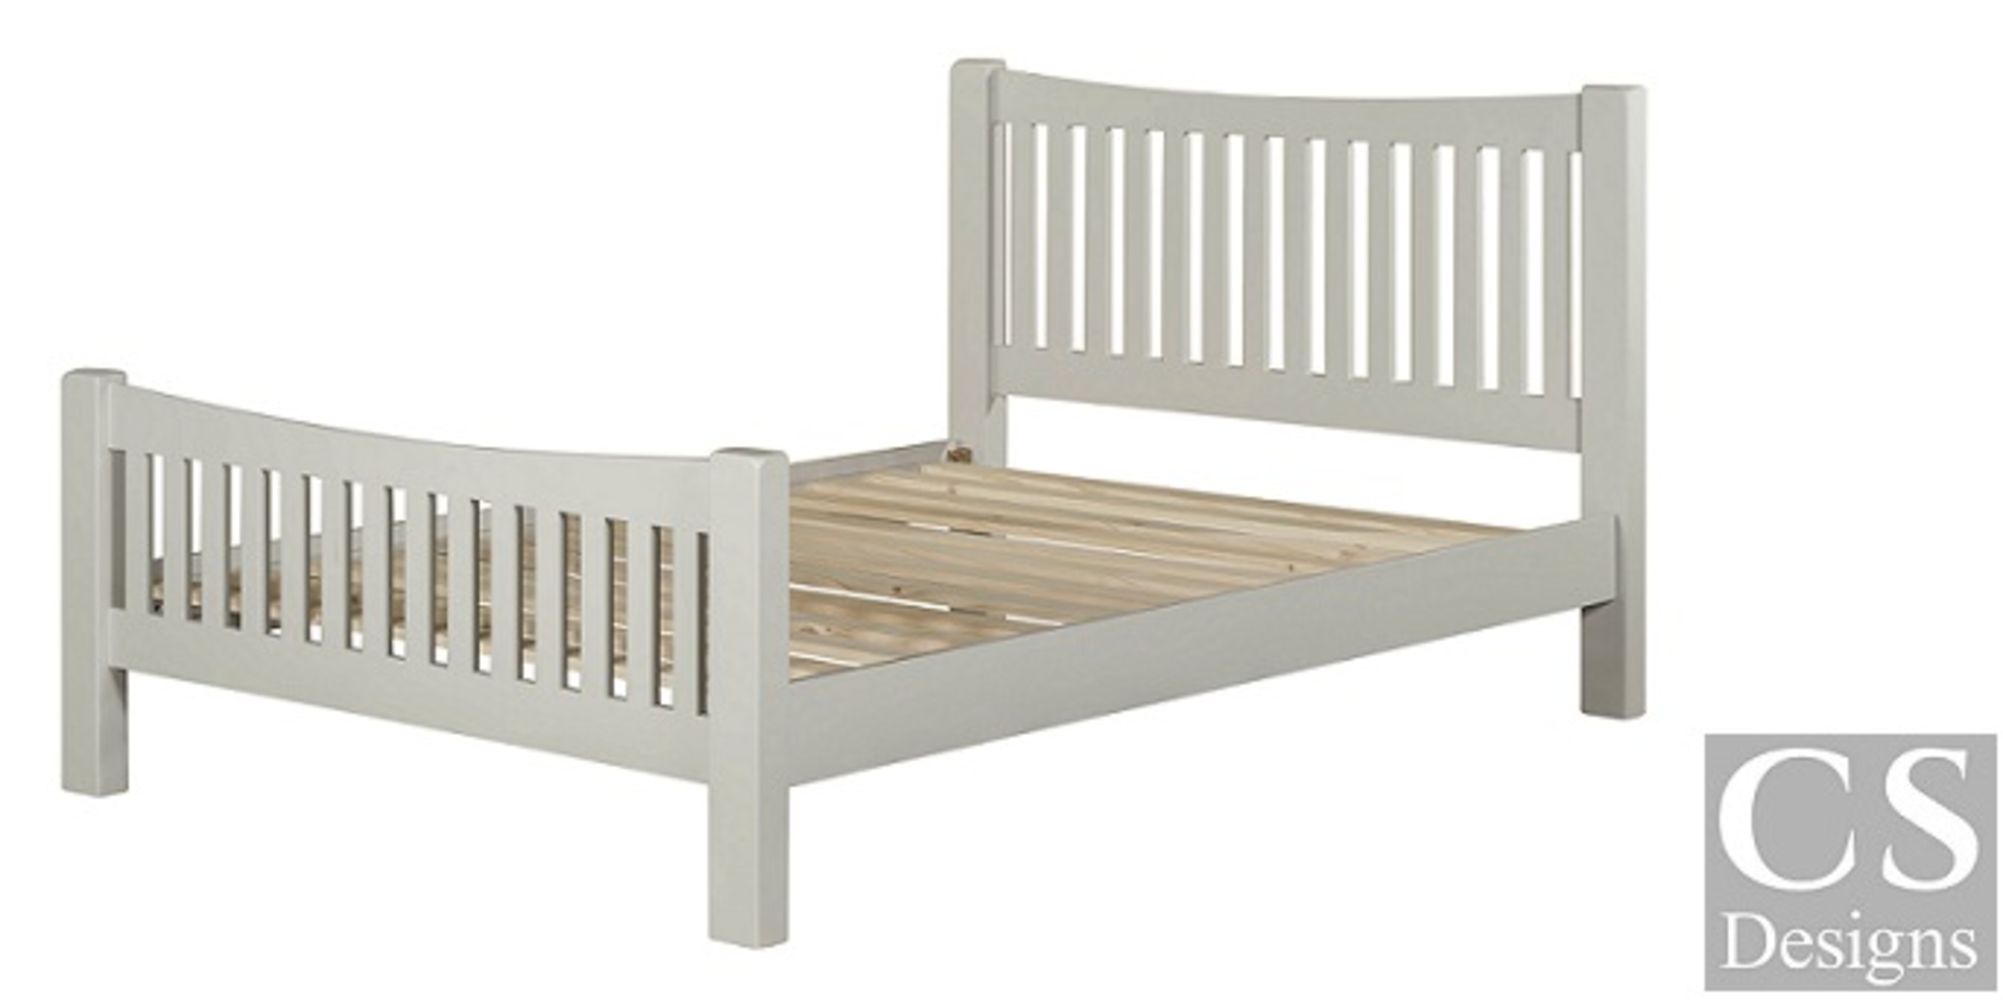 Huge discounts on brand New Oak Furniture & Mattresses Sourced From Well Known Retailer